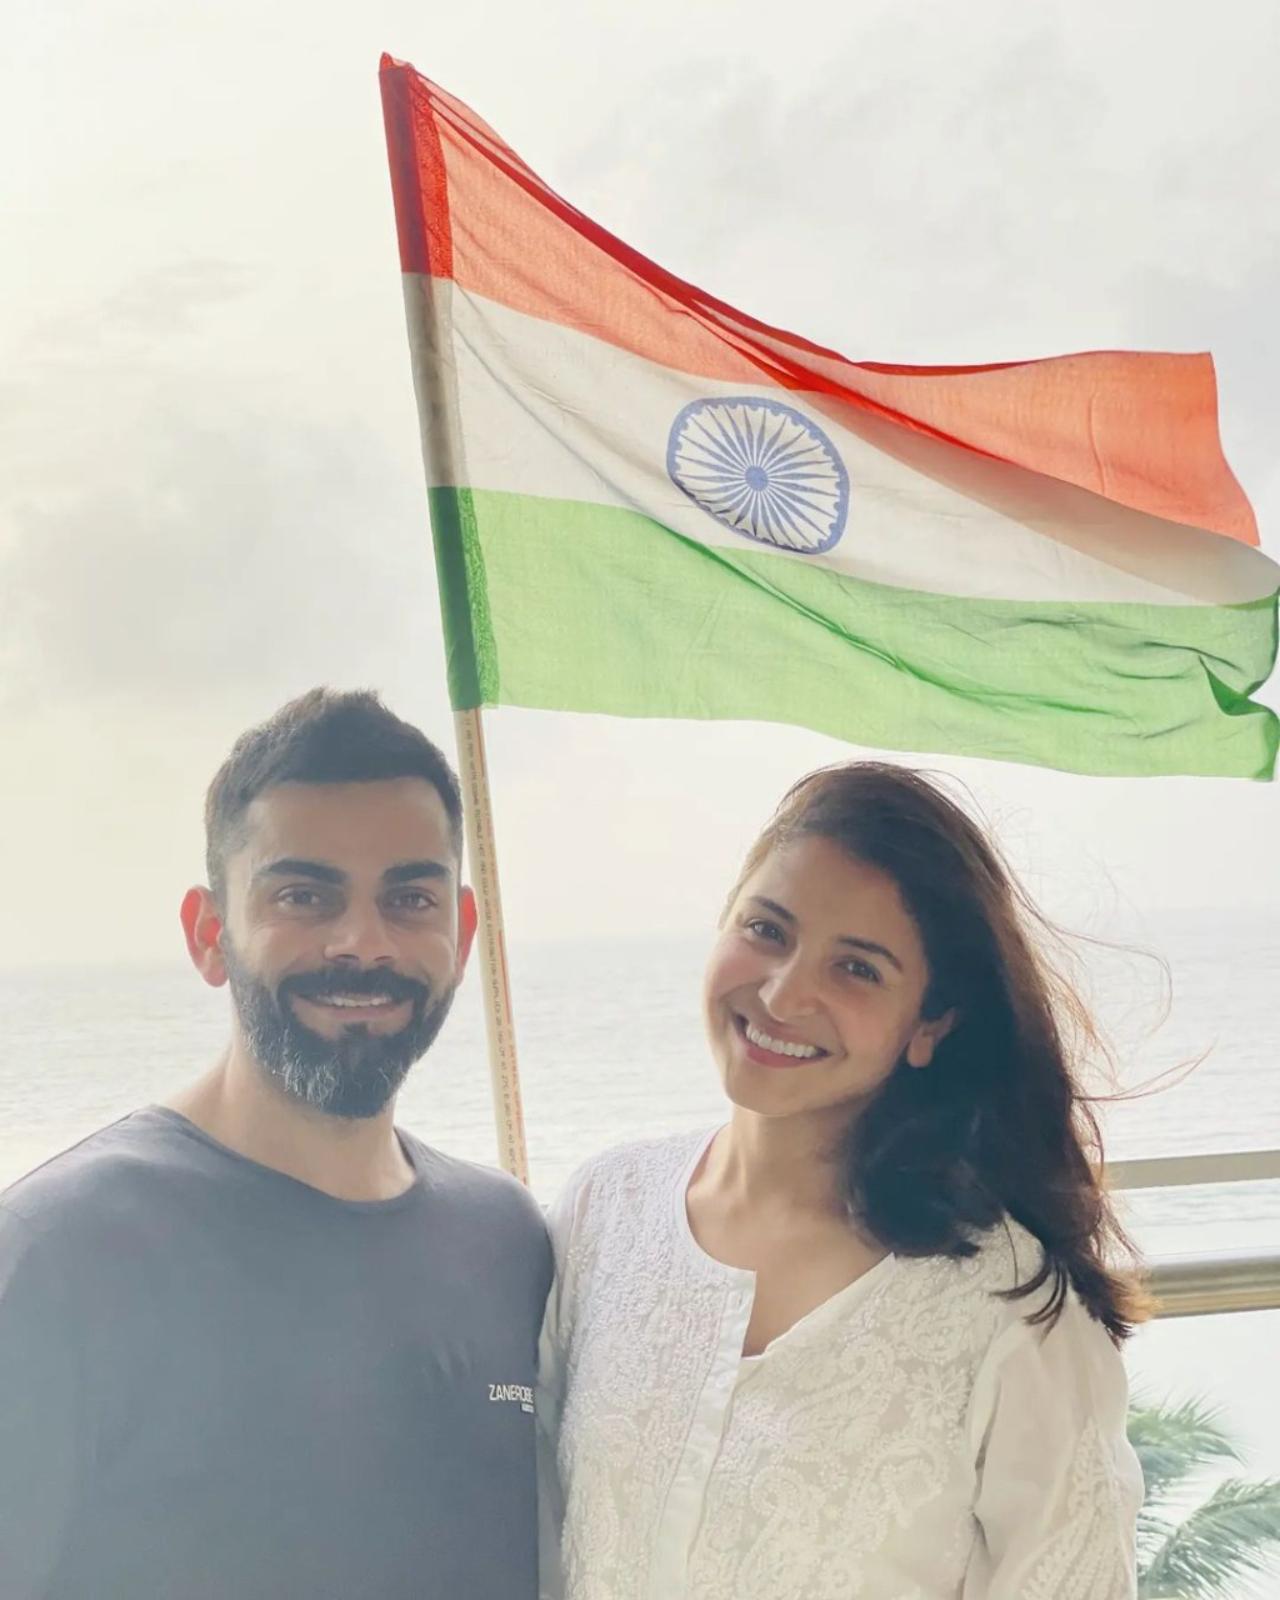 Anushka Sharma and Virat Kohli 
One of the most loved and popular couples of the country shared a picture clicked on the balcony of their Juhu home. The couple posed in front of the waving national flag